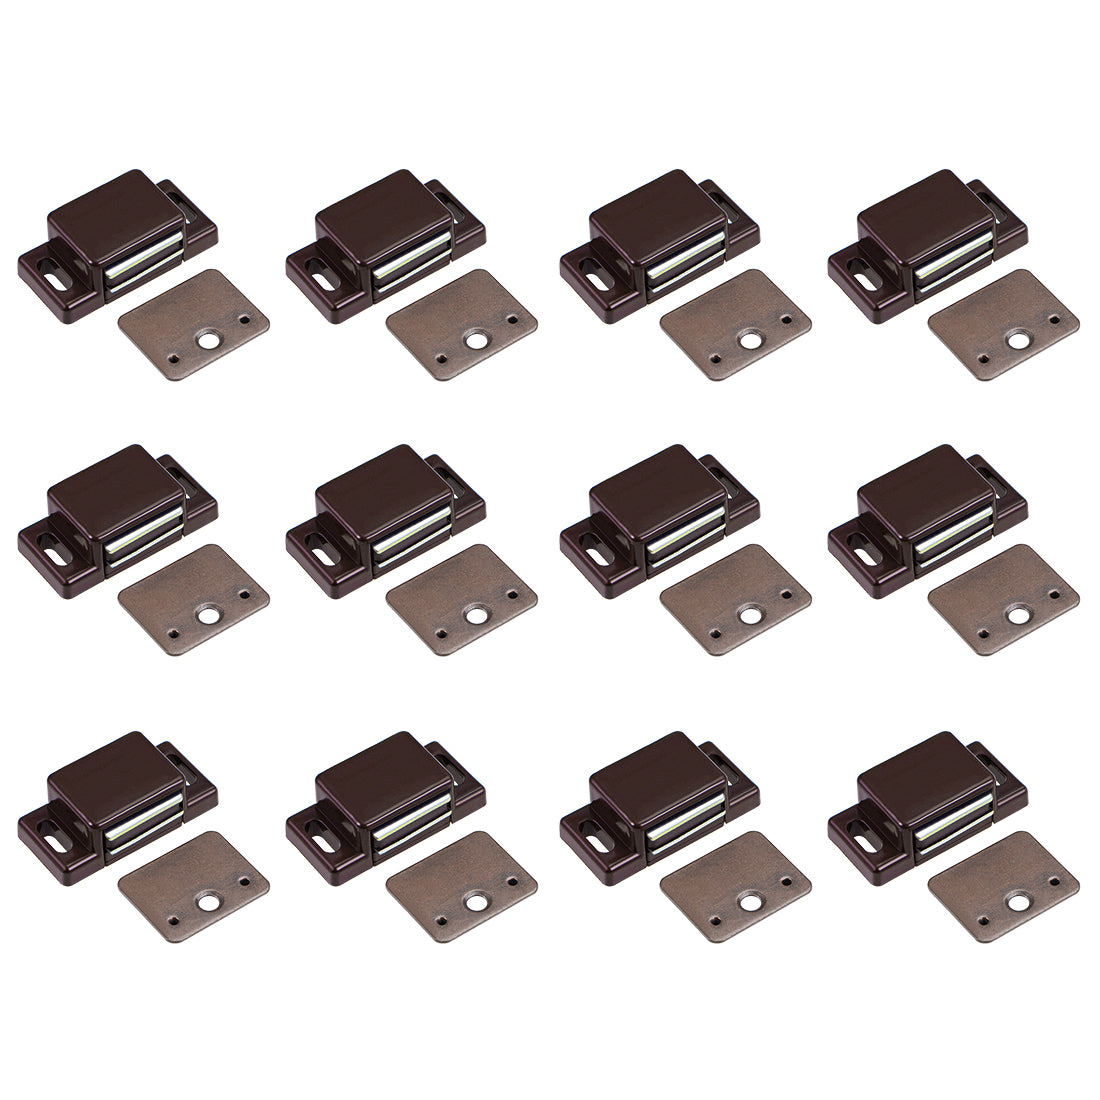 uxcell Uxcell Magnetic Cabinet Door Latches Catch 1.6" Length for Cupboard Closet Brown 12pcs